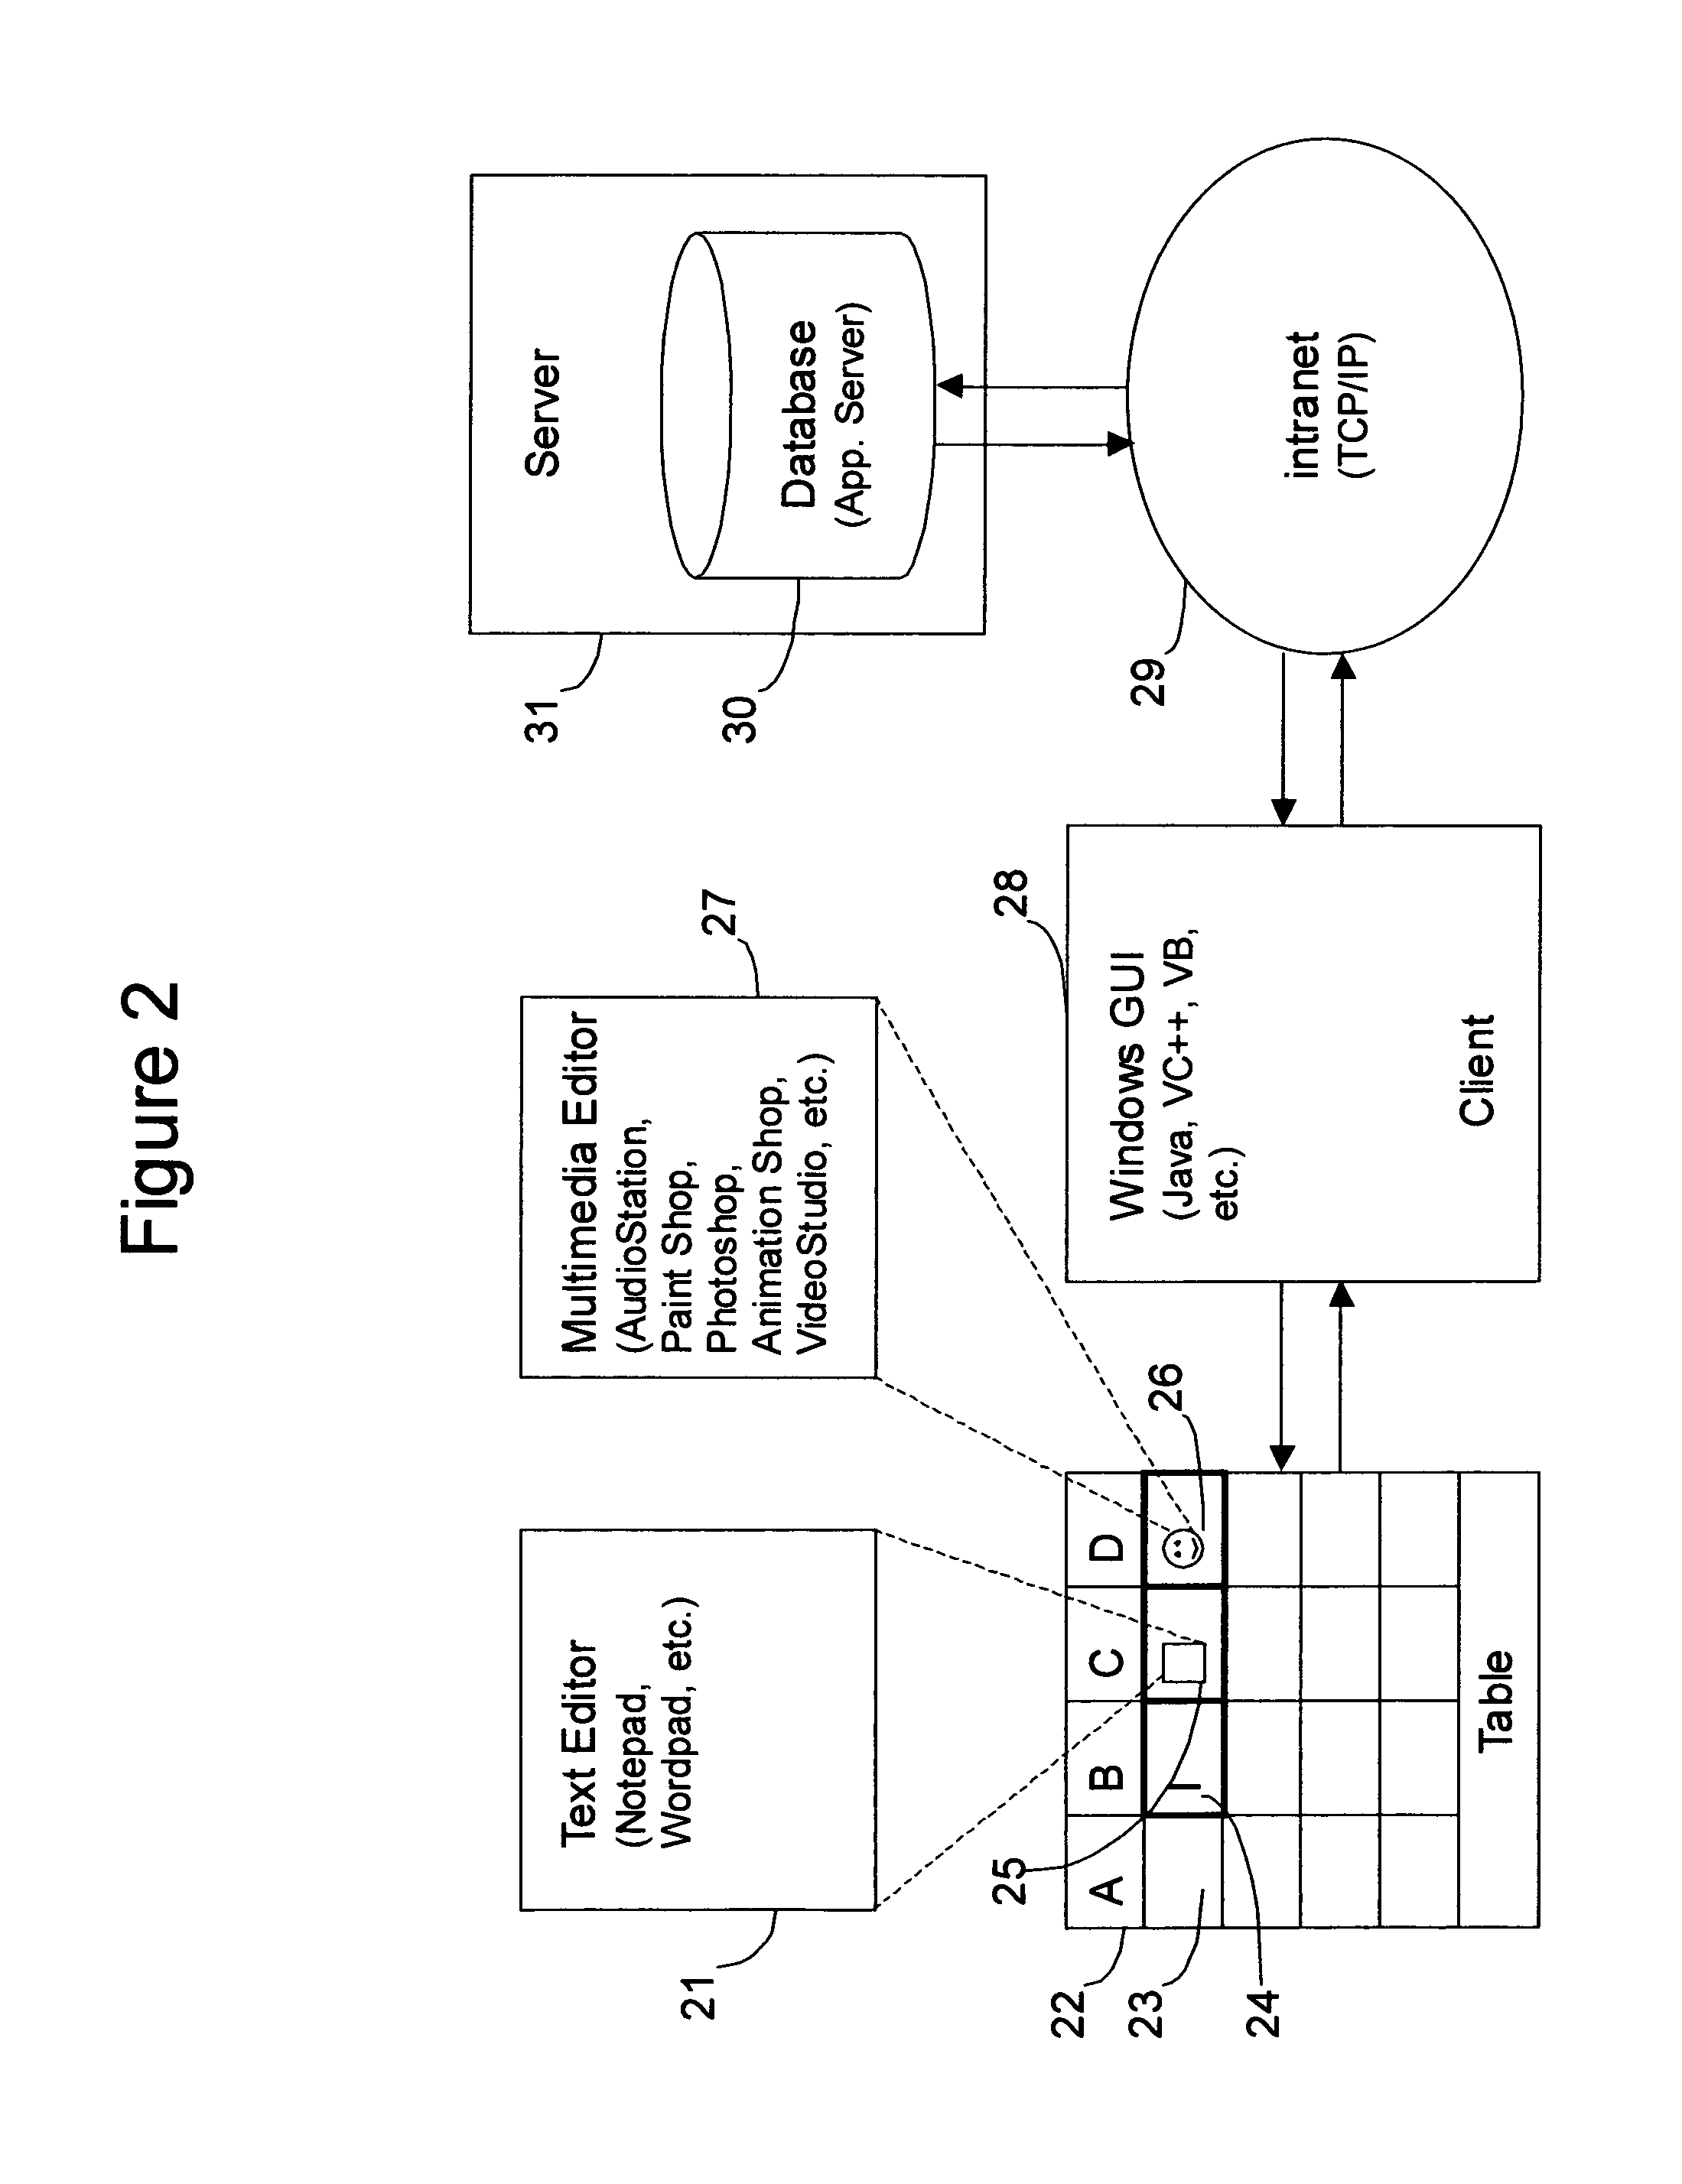 Integrated database data editing system